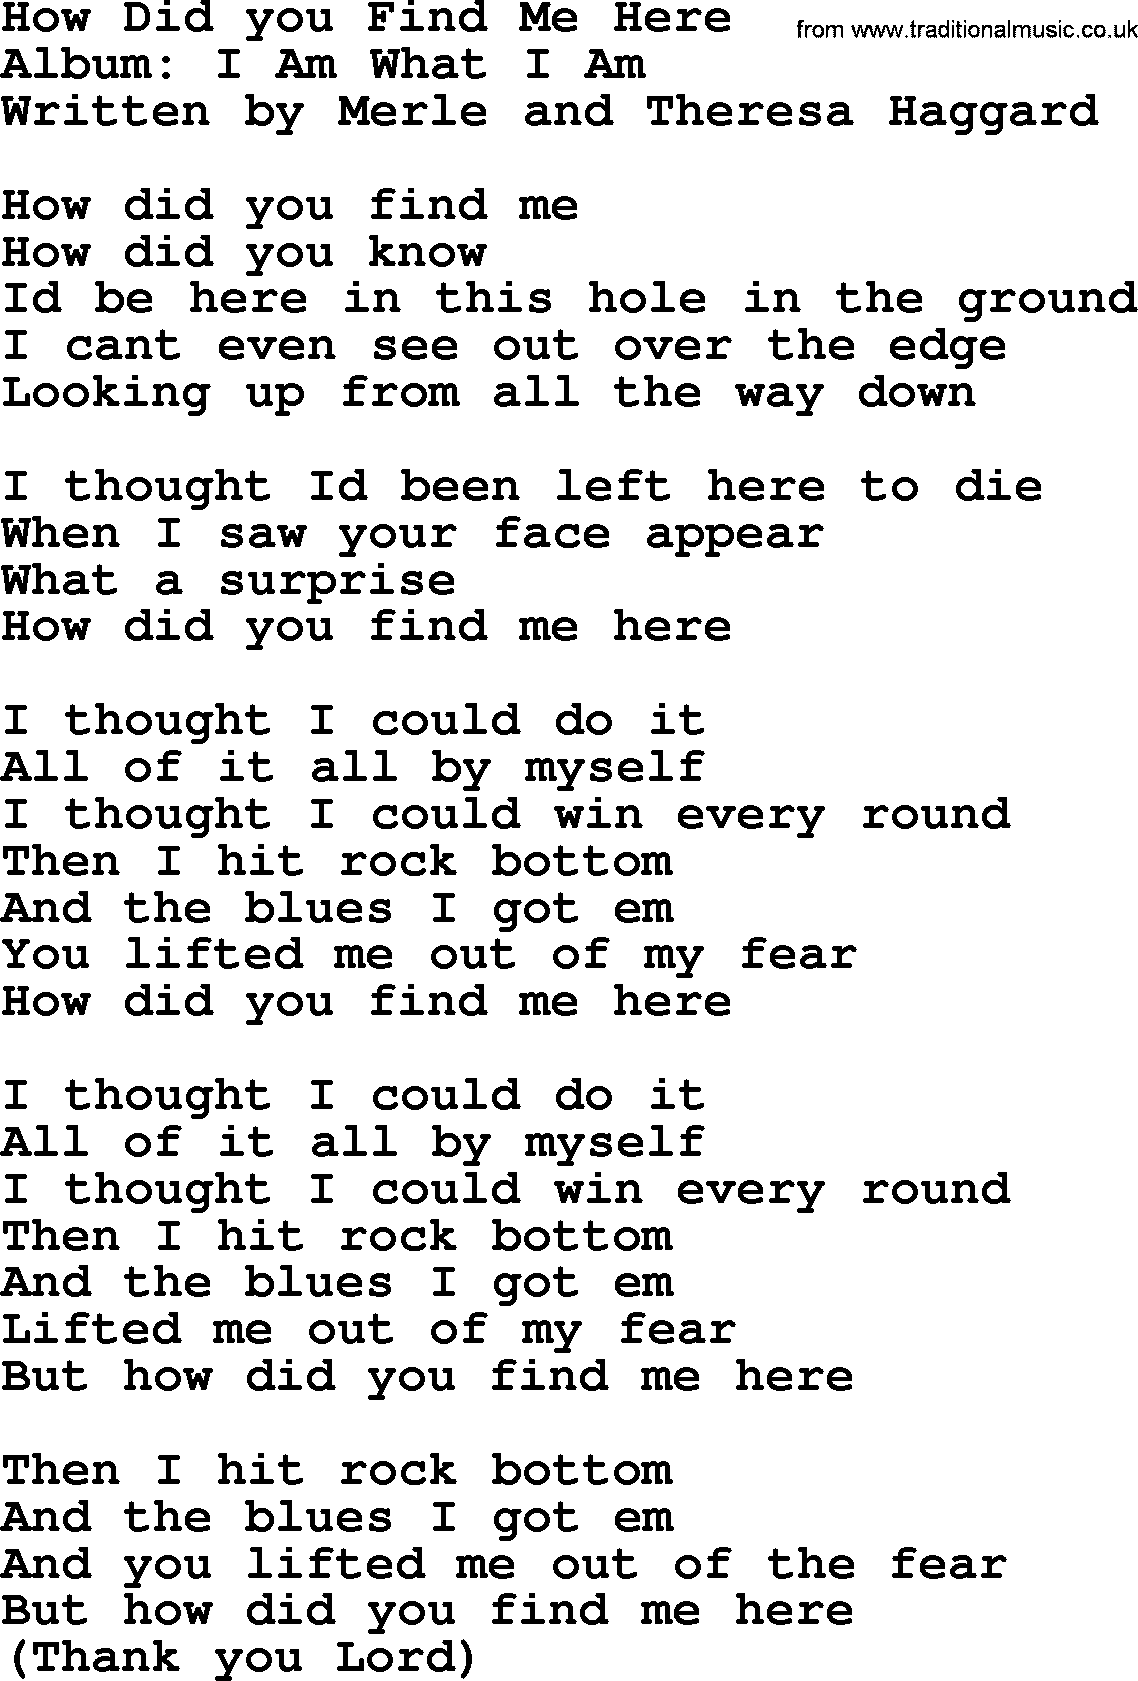 Merle Haggard song: How Did You Find Me Here, lyrics.